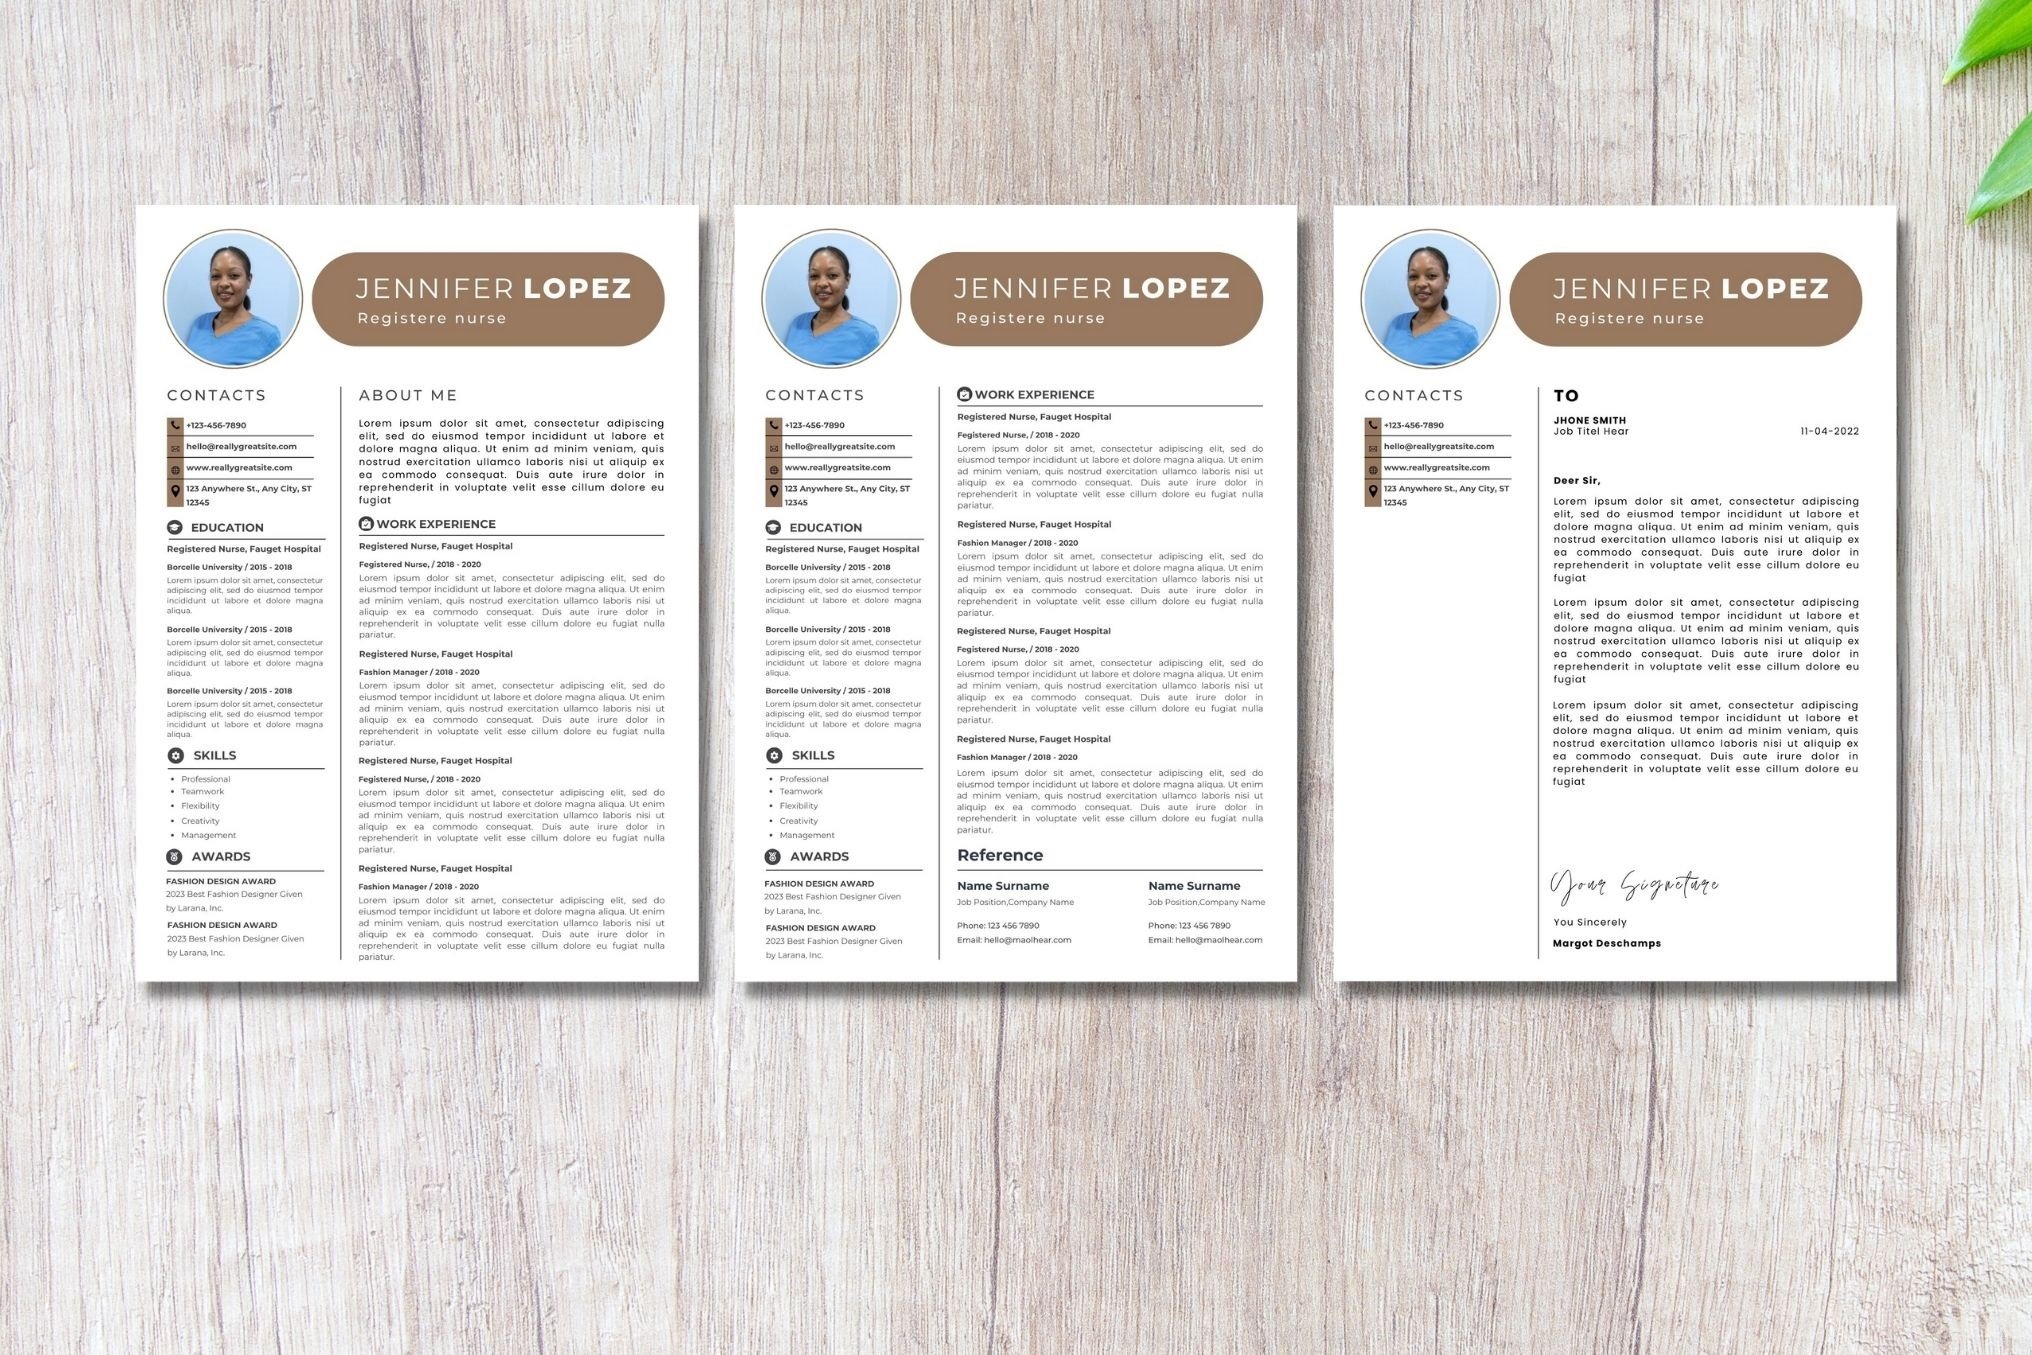 Set of two resumes on a wooden table.